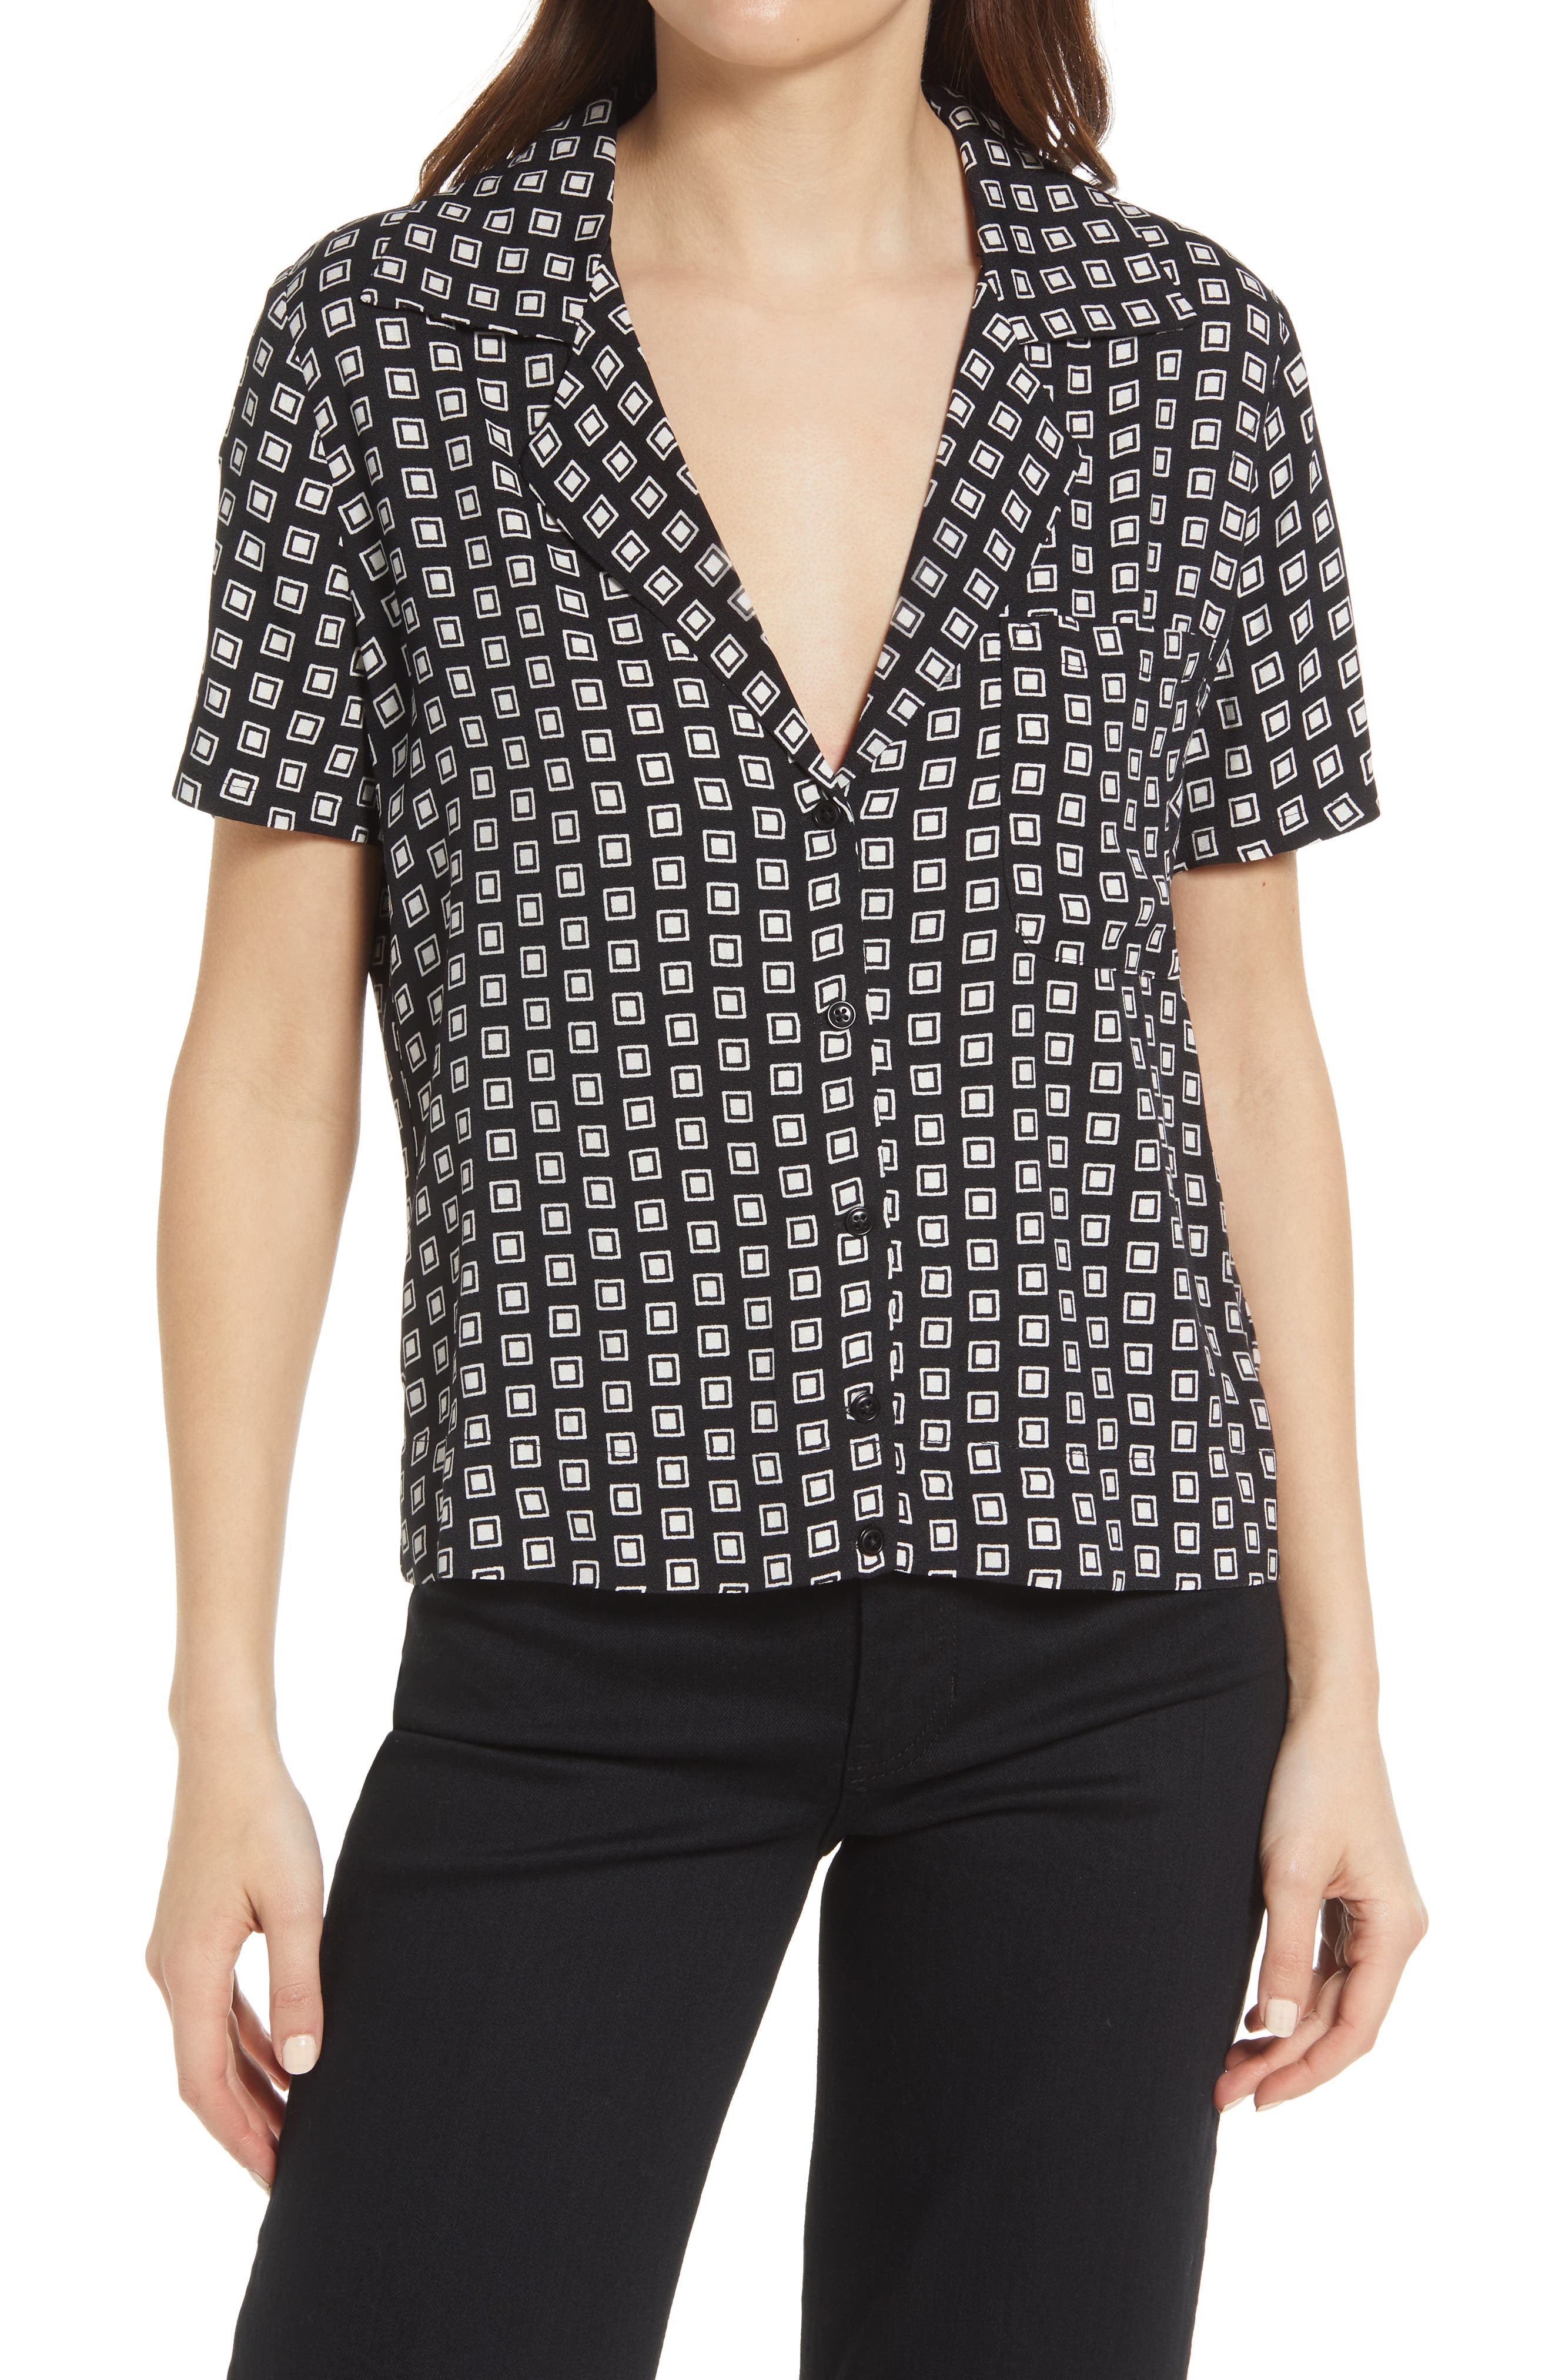 Reformation Cuba Print Blouse in Giotto at Nordstrom, Size Small